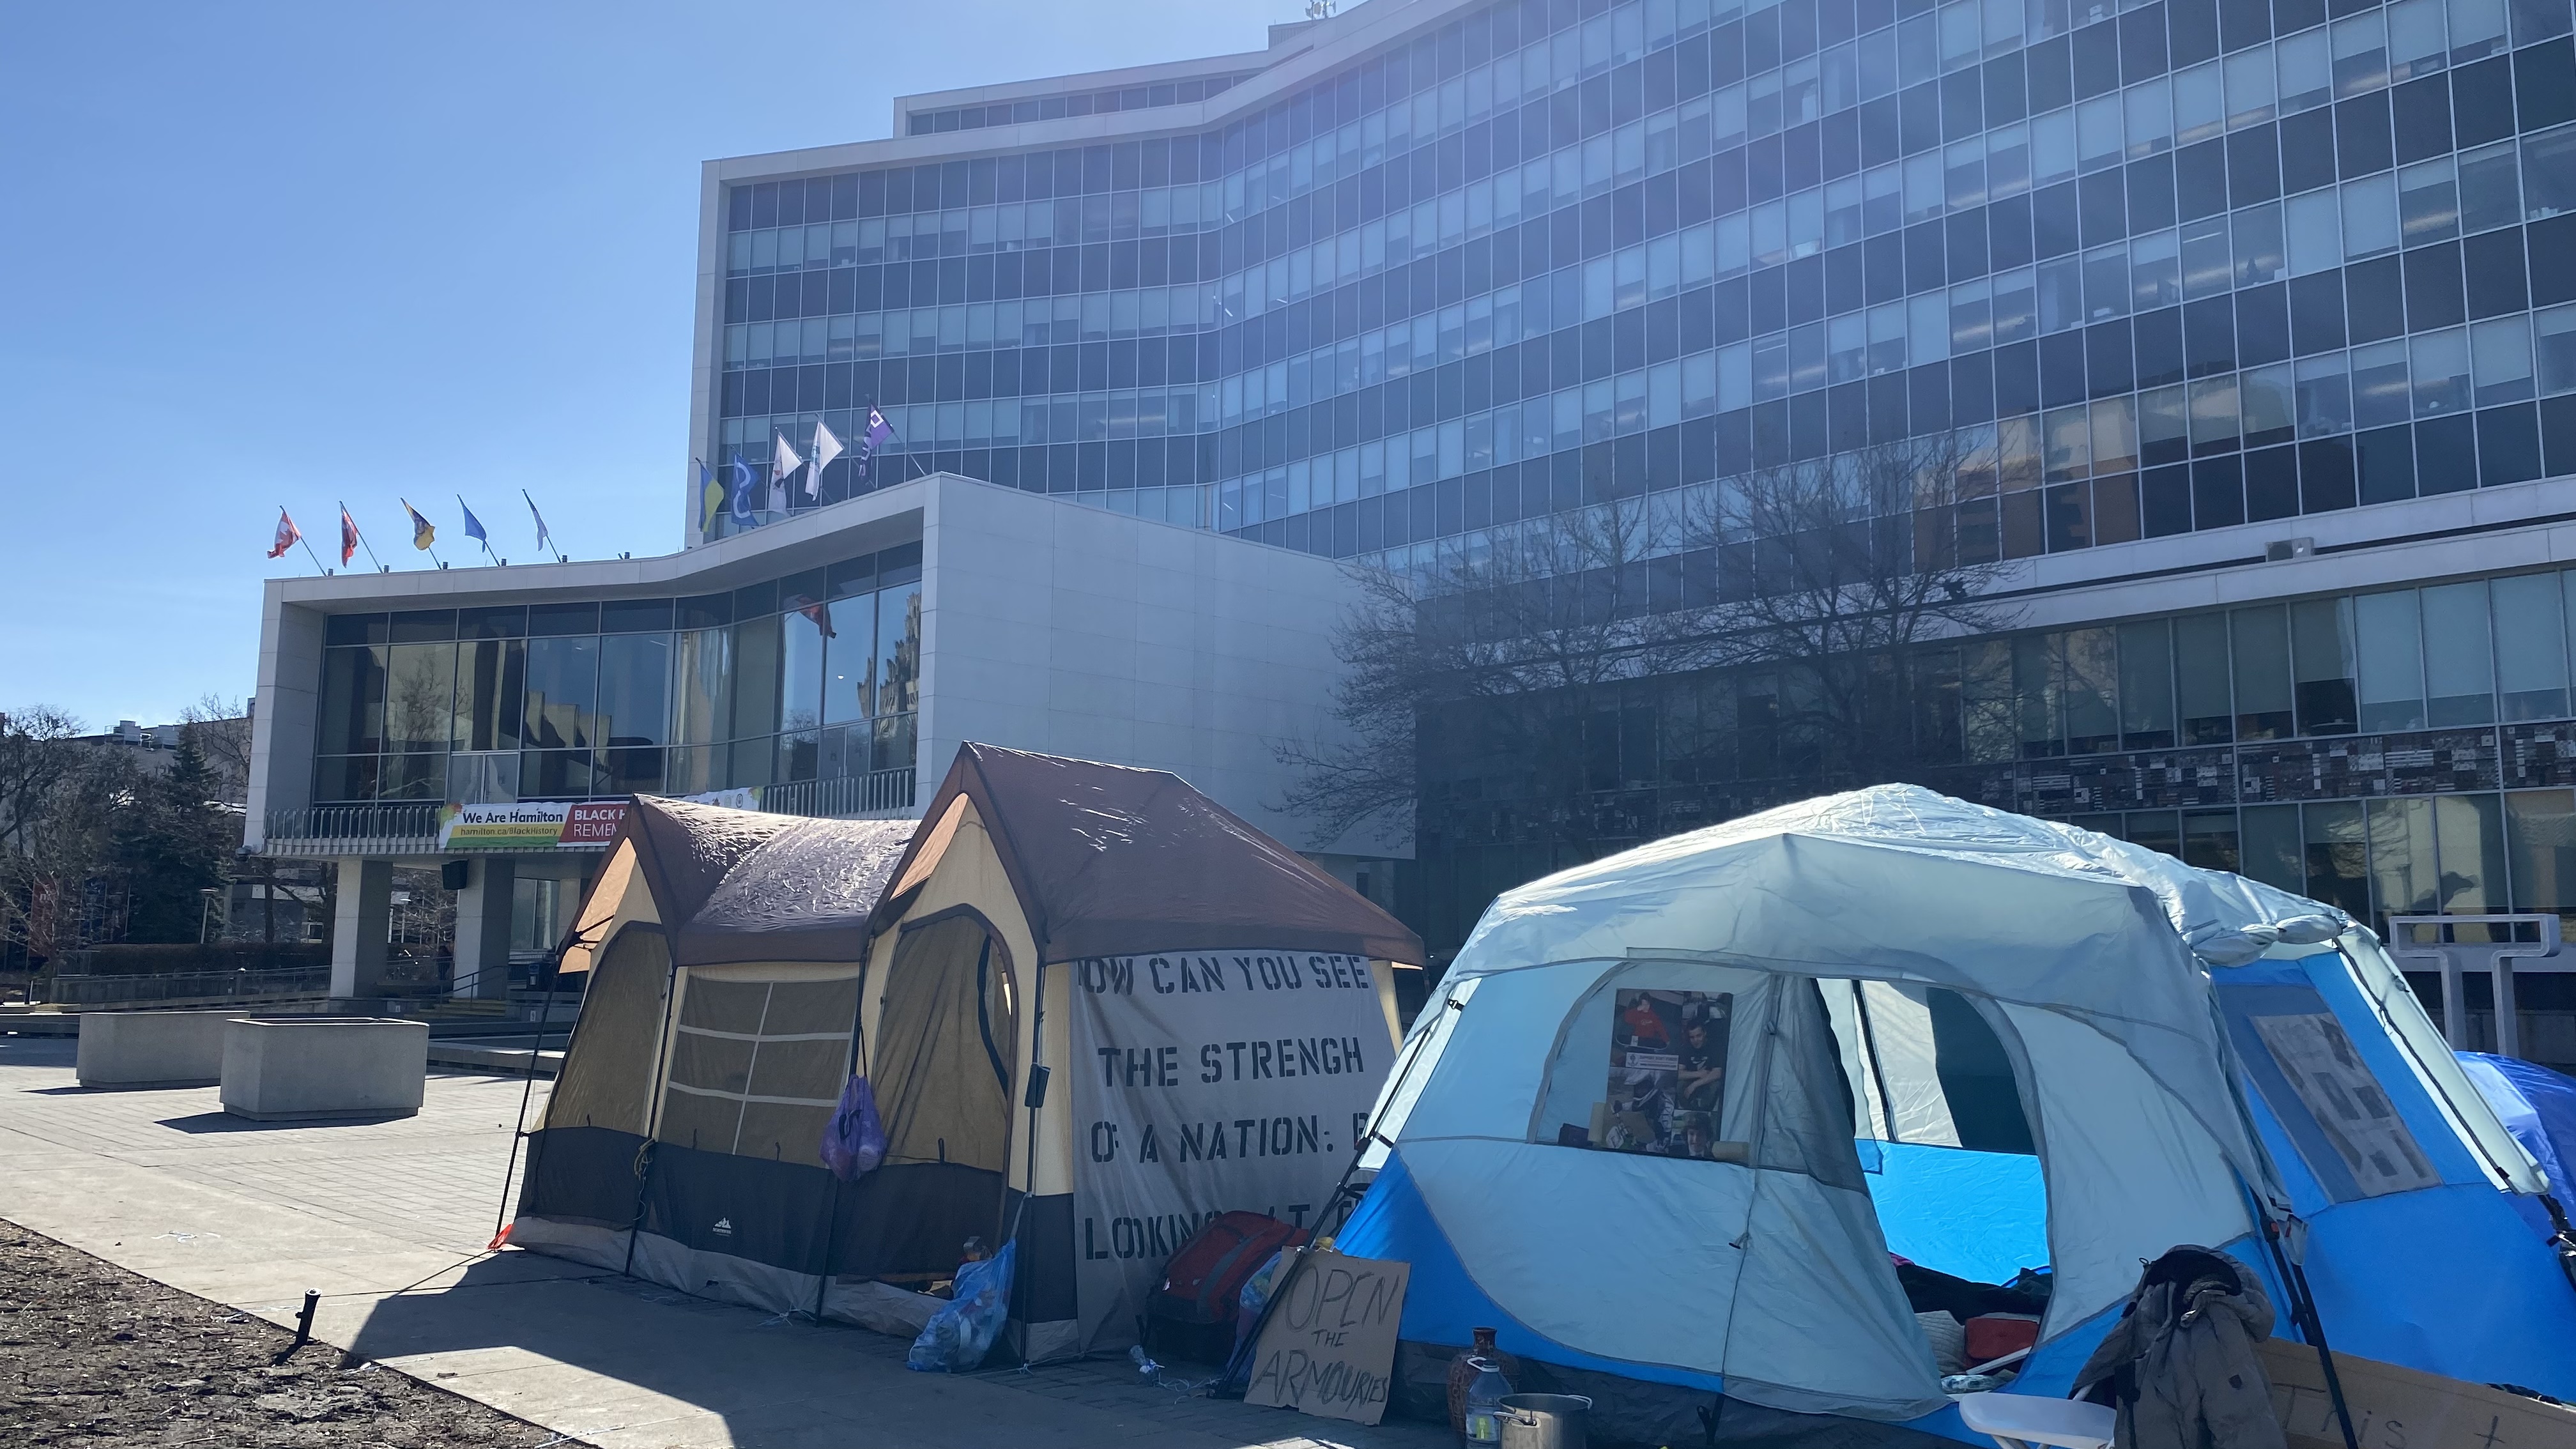 City hall encampment shrinks as Hamilton uses outreach, notices to relocate unhoused